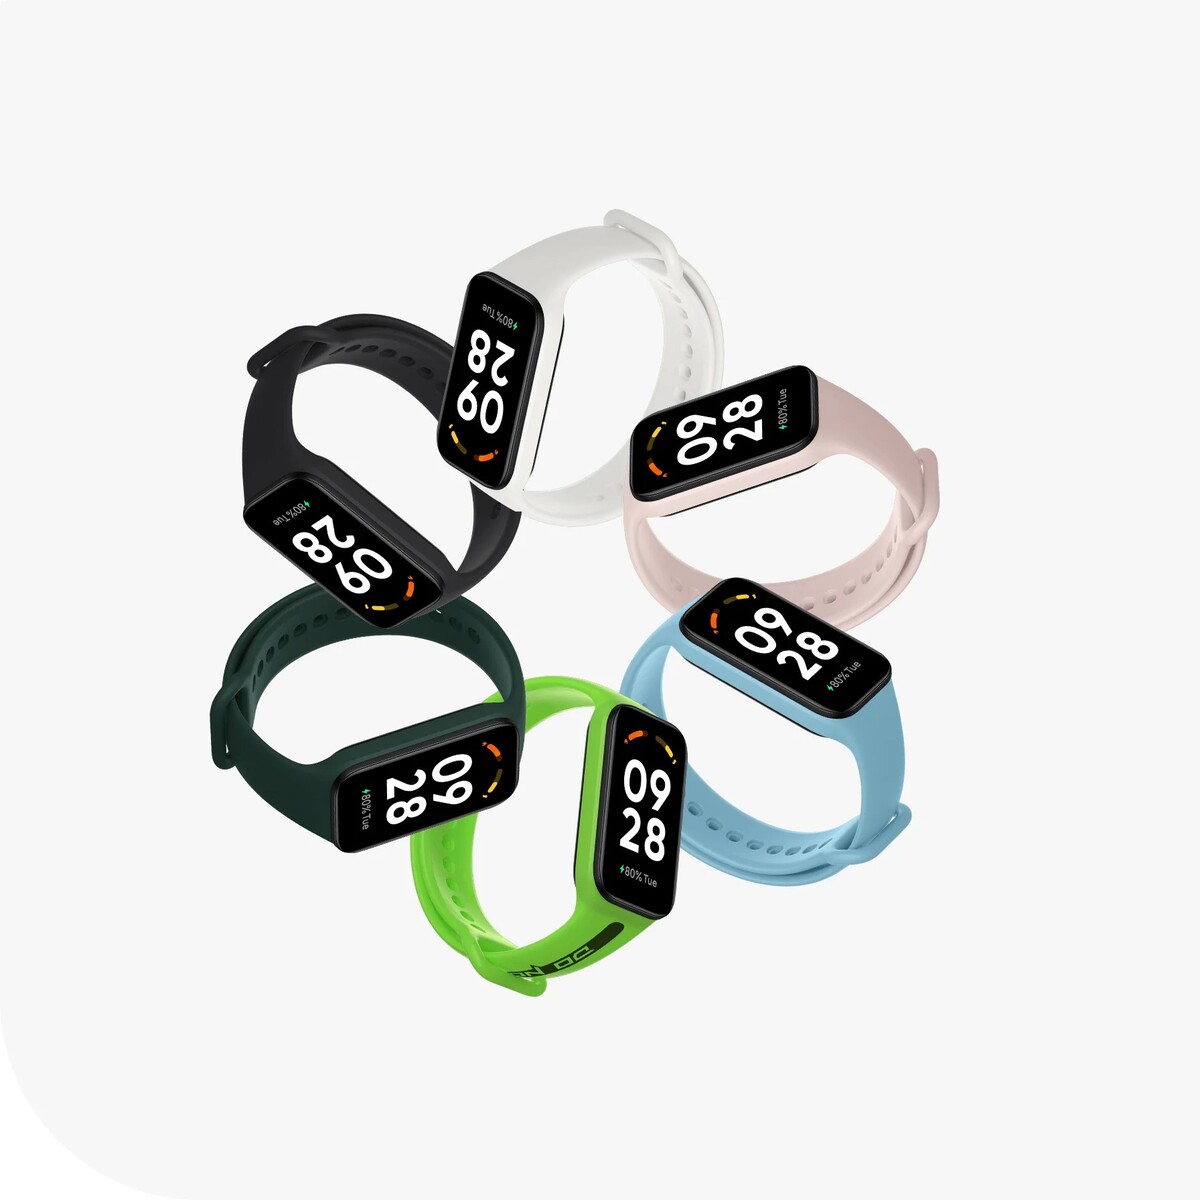 Redmi Smart Band 2 launches in Japan as UK and EU prices confirmed